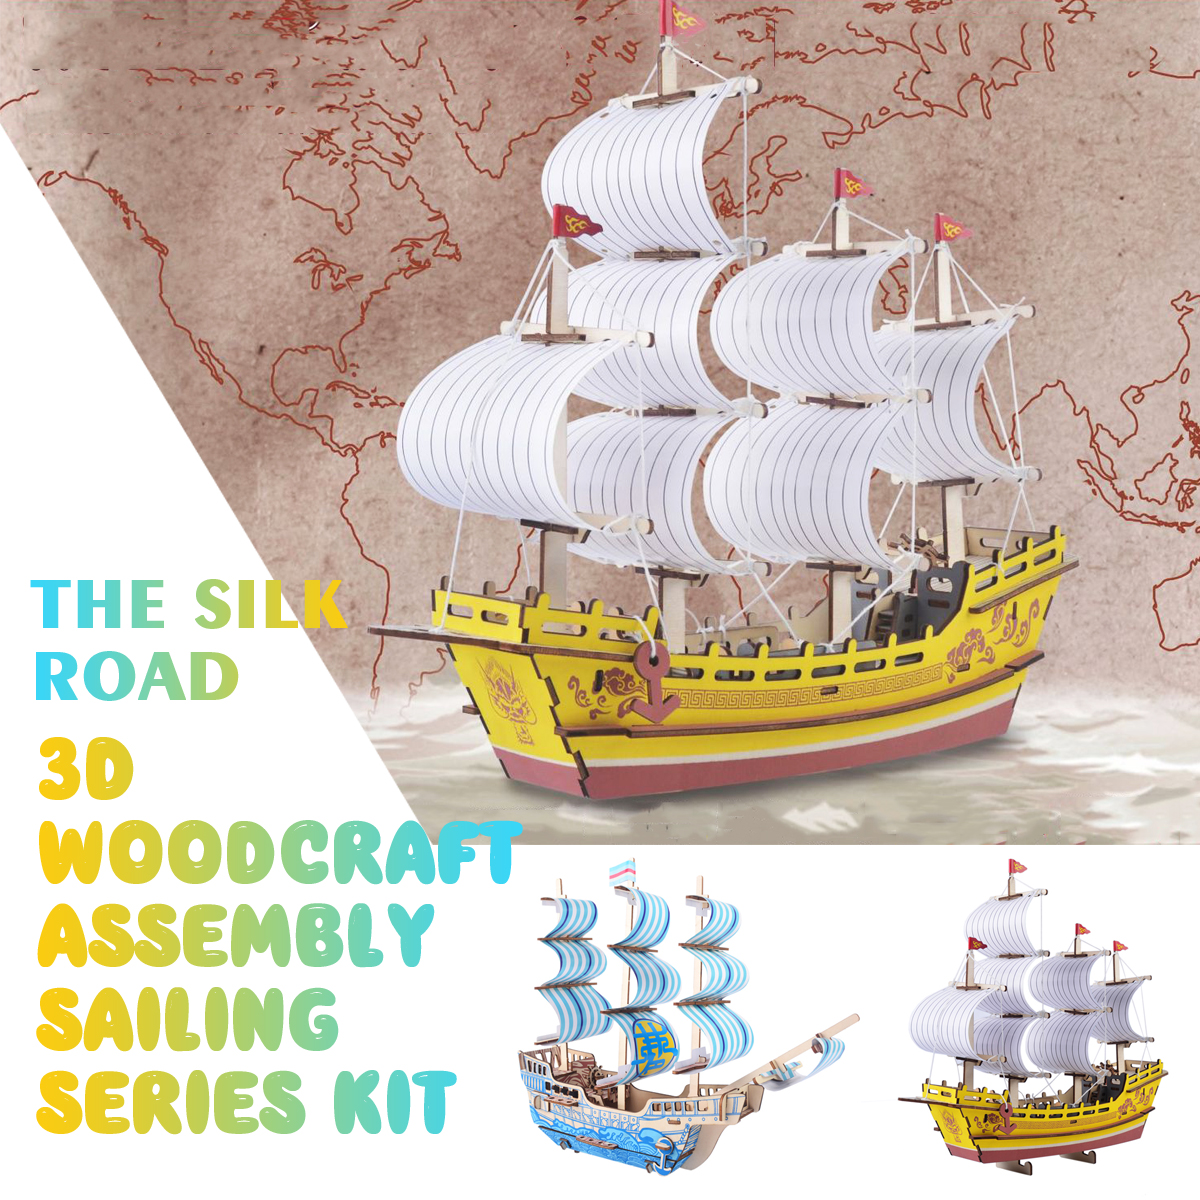 3D-Woodcraft-Assembly-Sailing-Series-Kit-Jigsaw-Puzzle-Decoration-Toy-Model-for-Kids-Gift-1635638-1